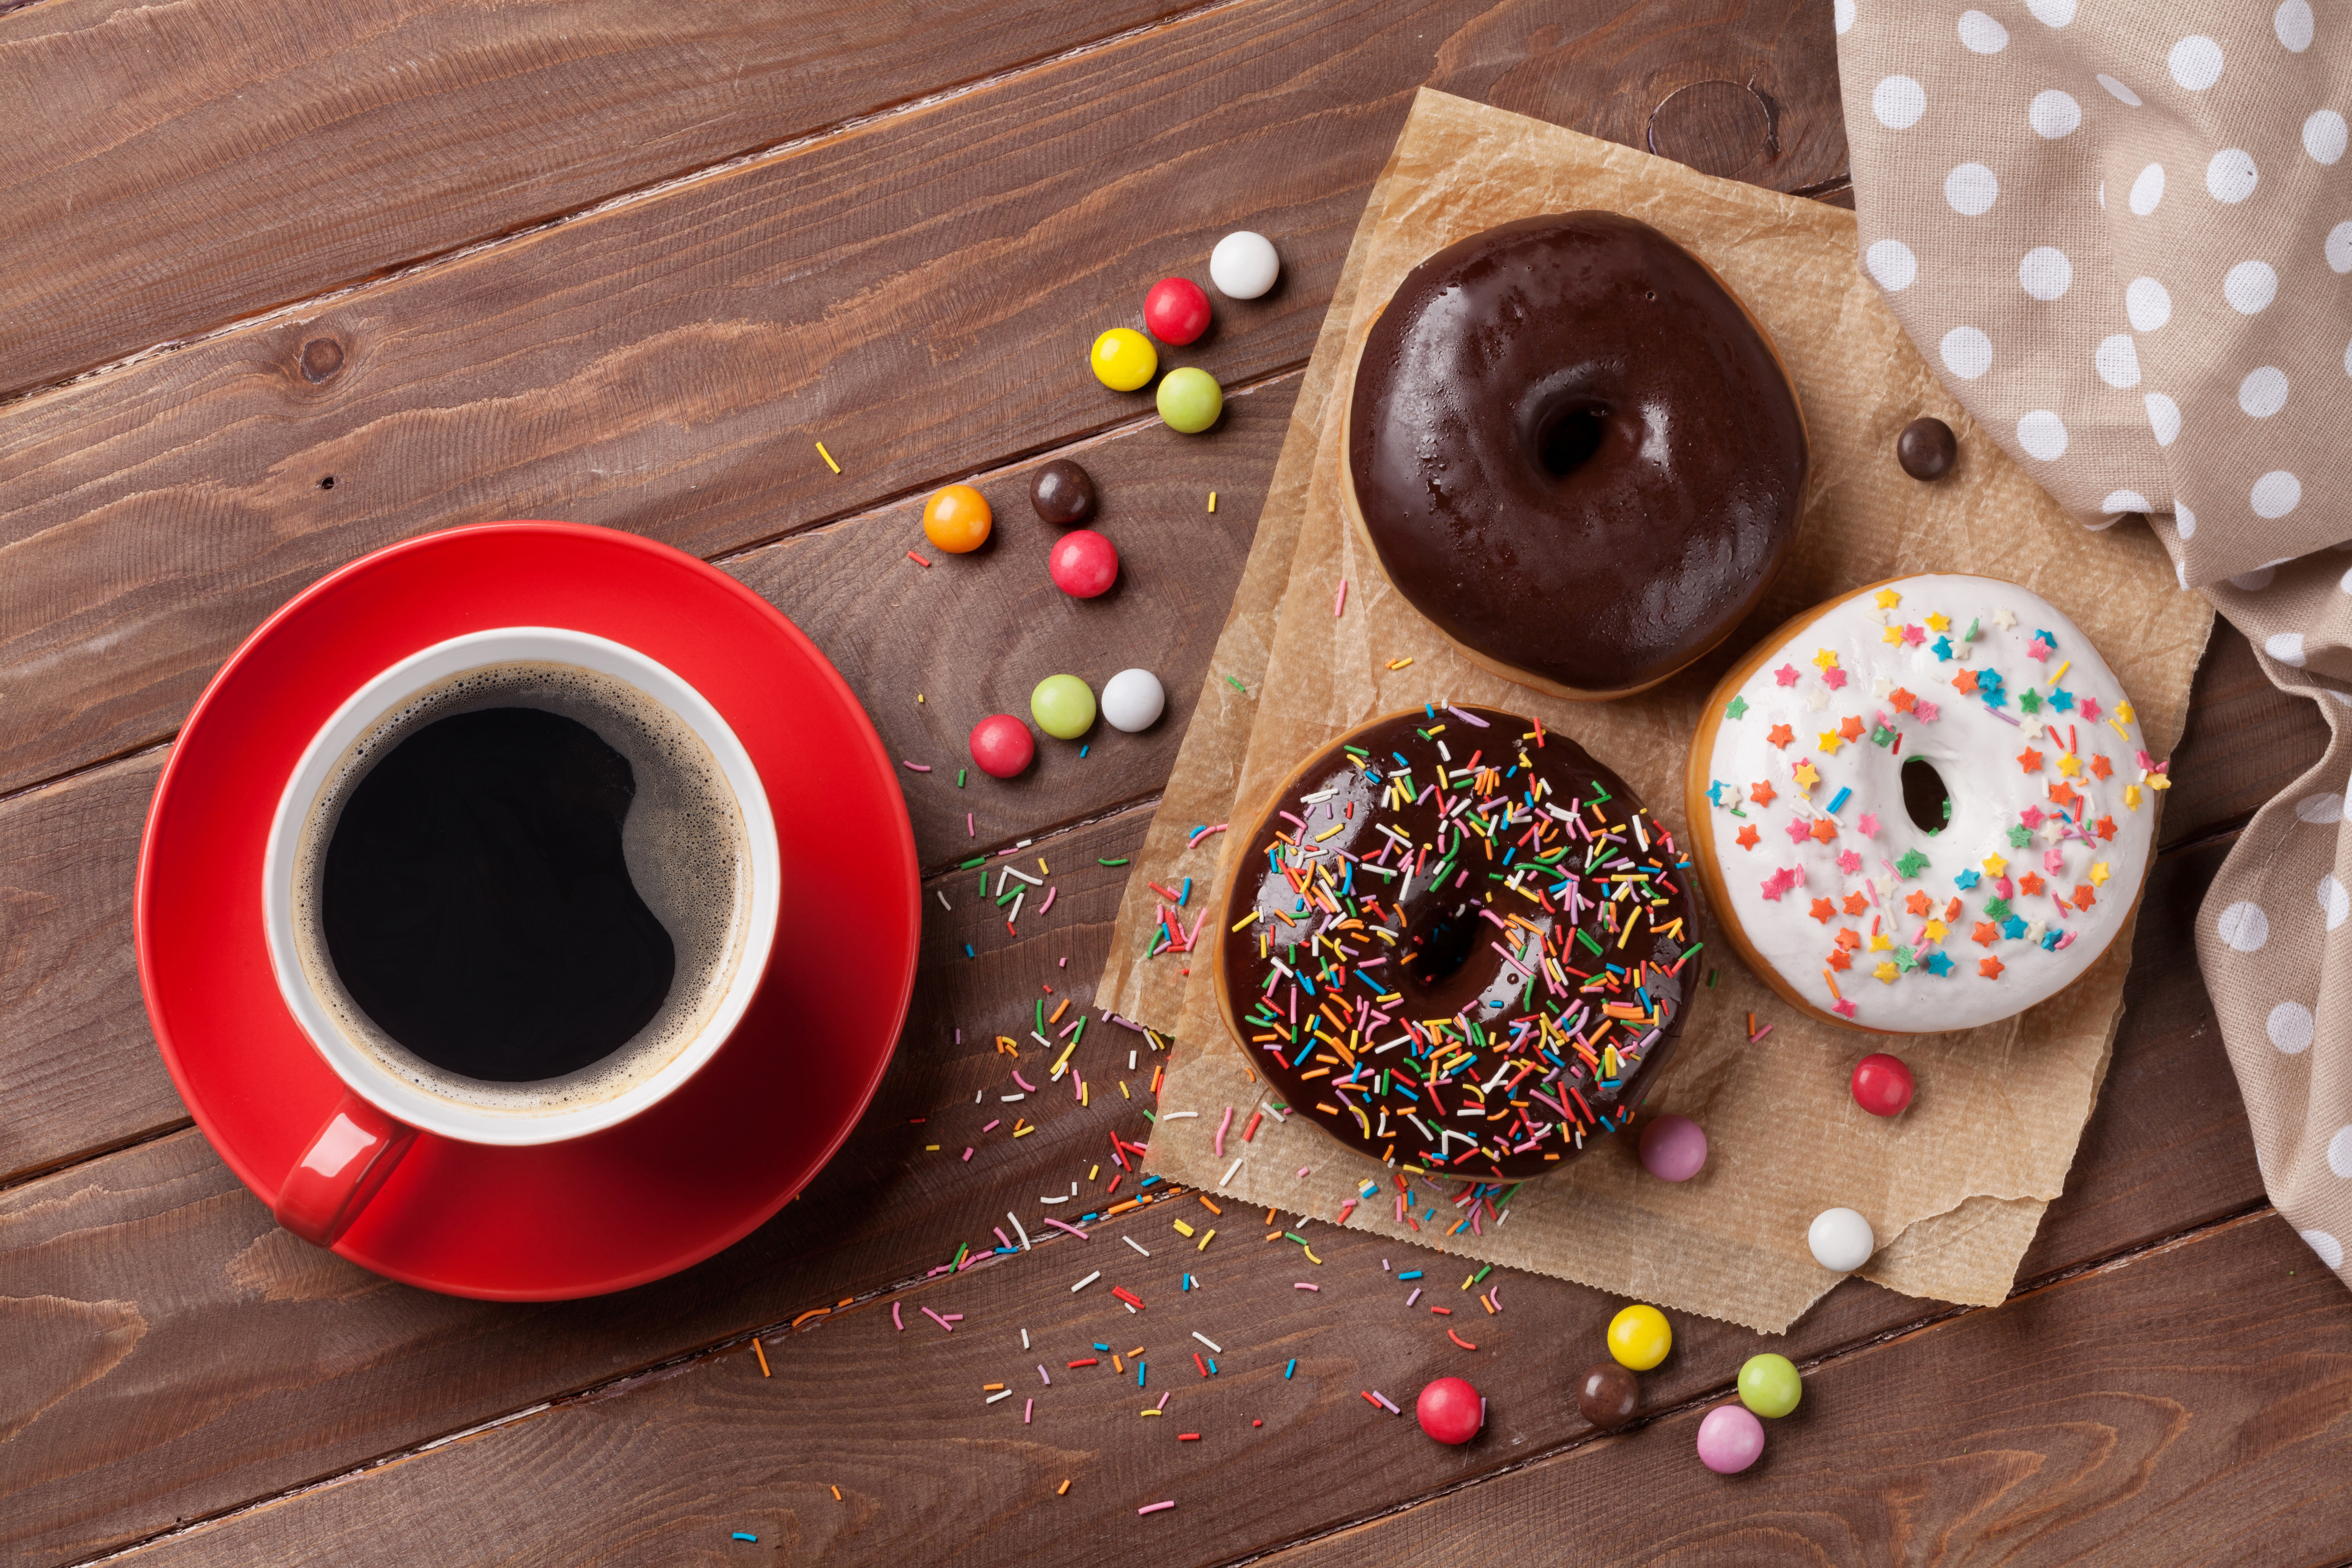 HD desktop wallpaper: Food, Coffee, Sweets, Doughnut, Candy download free  picture #1529257